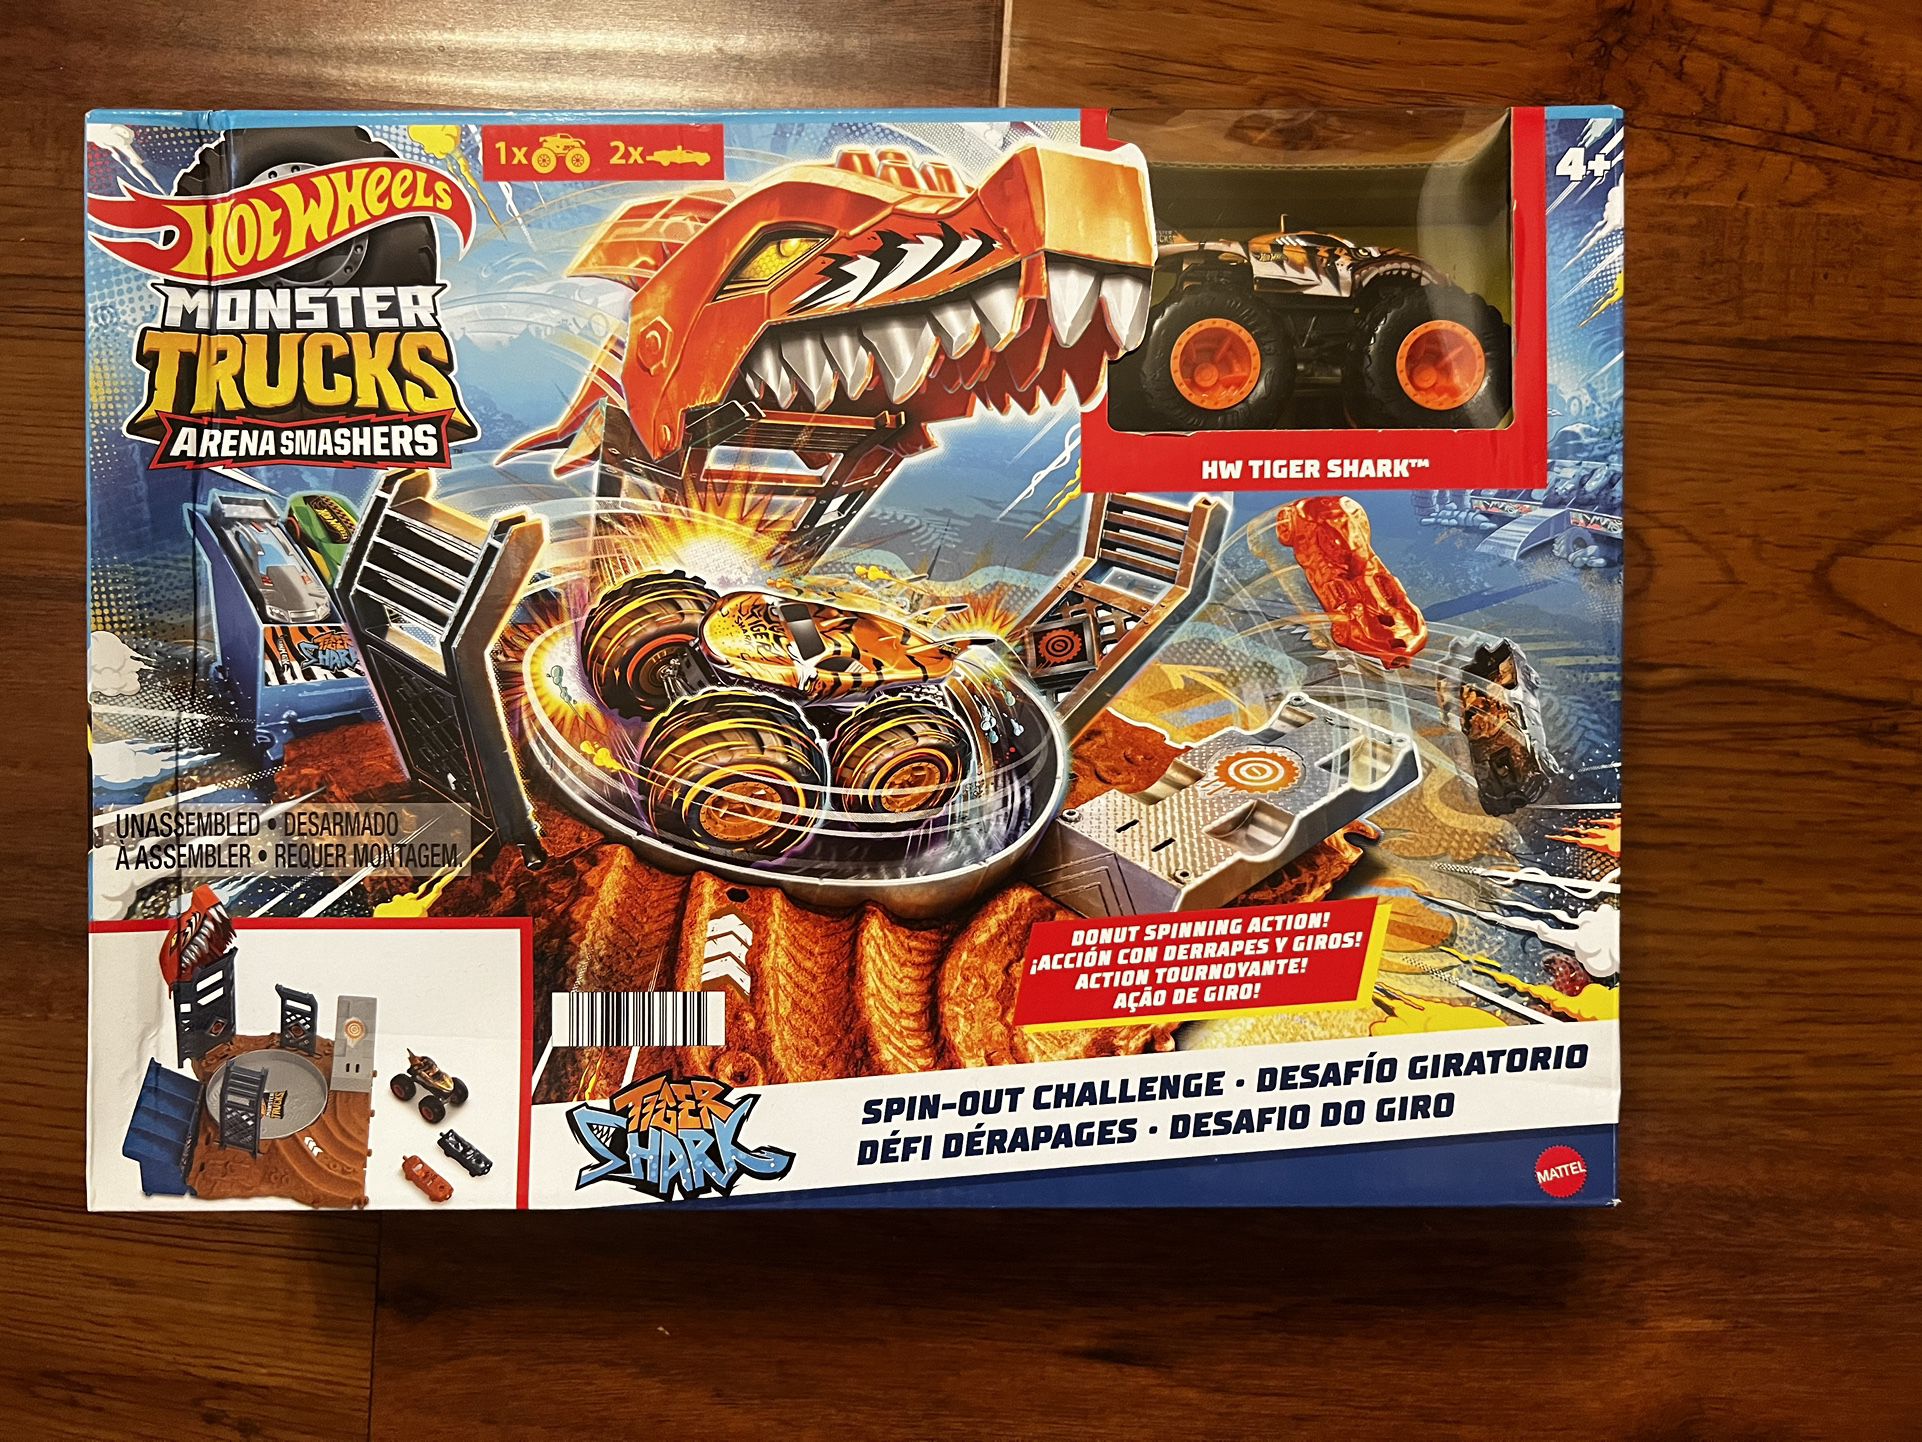 Hot Wheels Monster Trucks Arena Smashers Tiger Shark Spin-Out Challenge with 1 Toy Truck